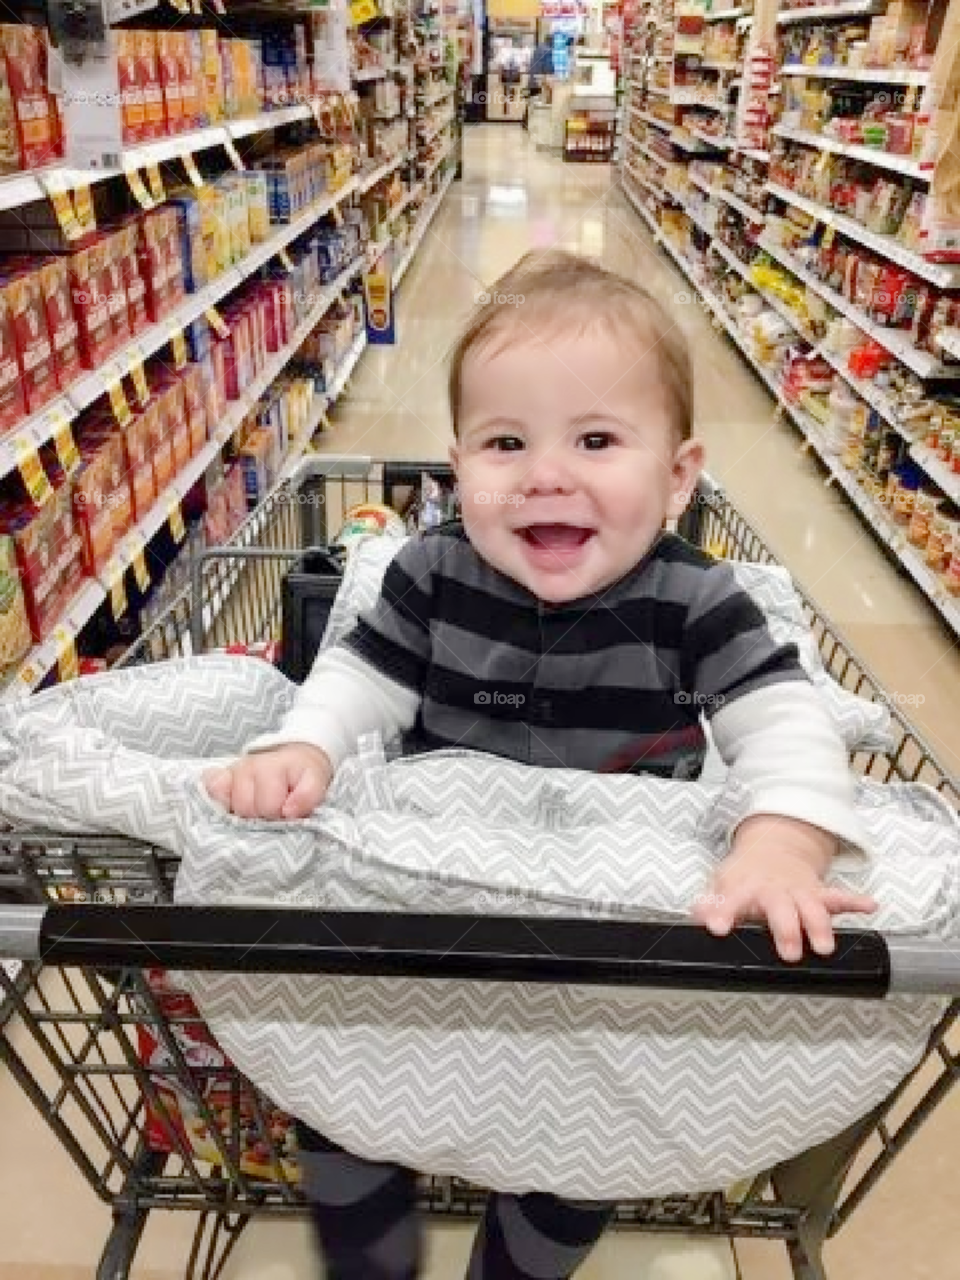 Baby loves grocery shopping and can't stop smiling